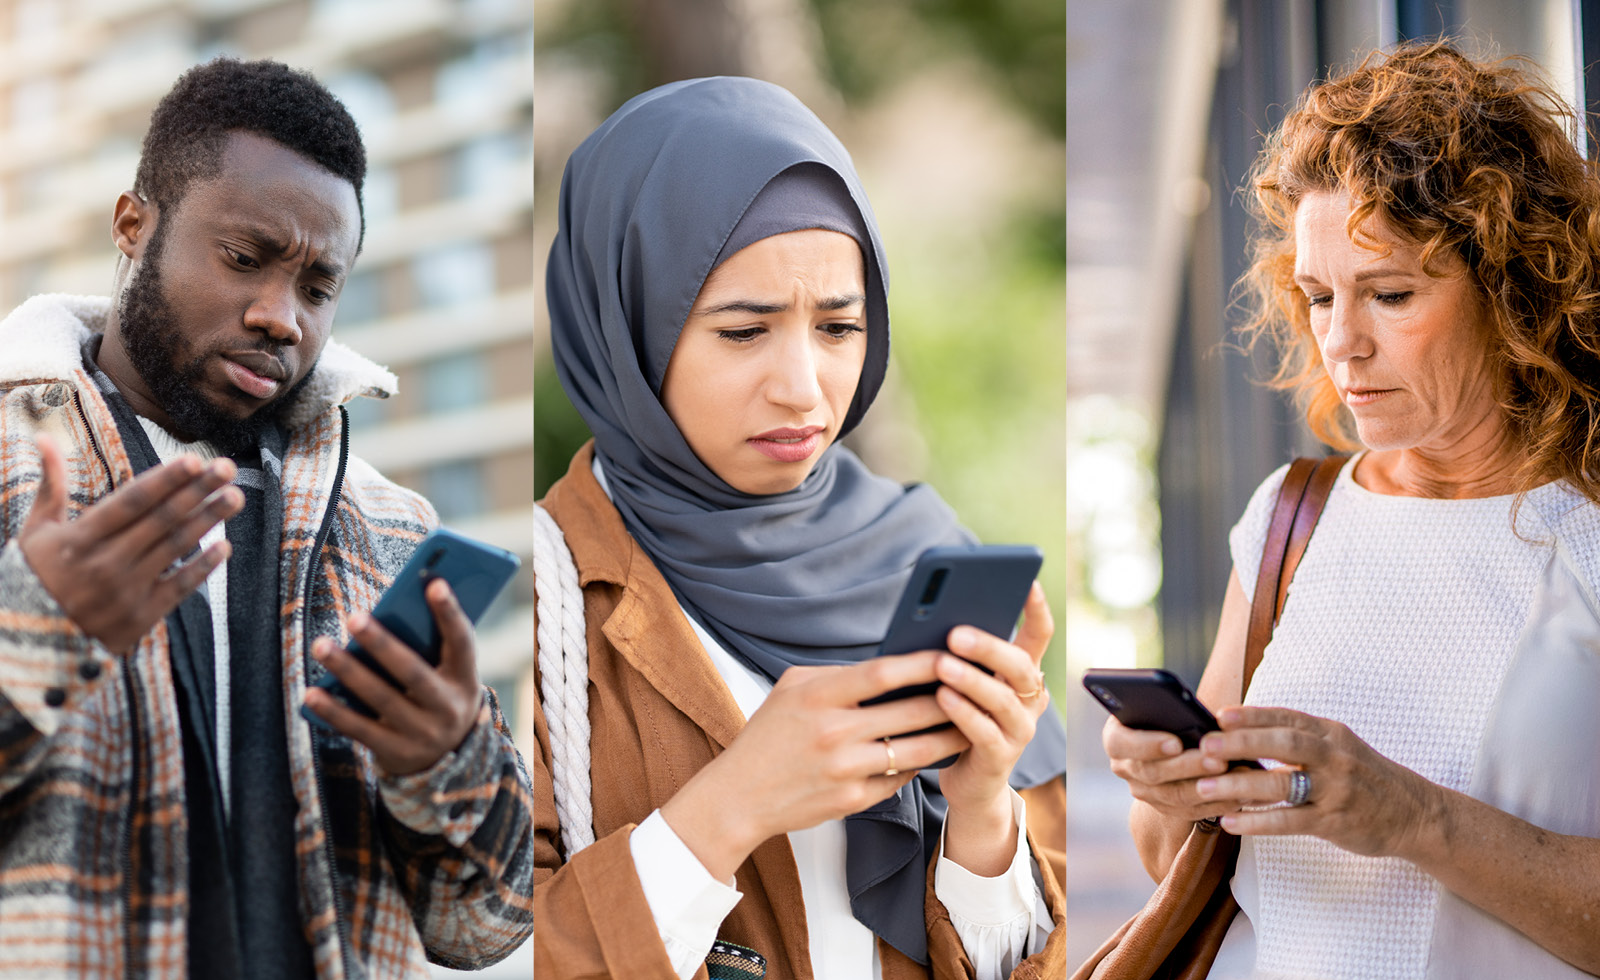 three individuals reacting to something on their smartphones